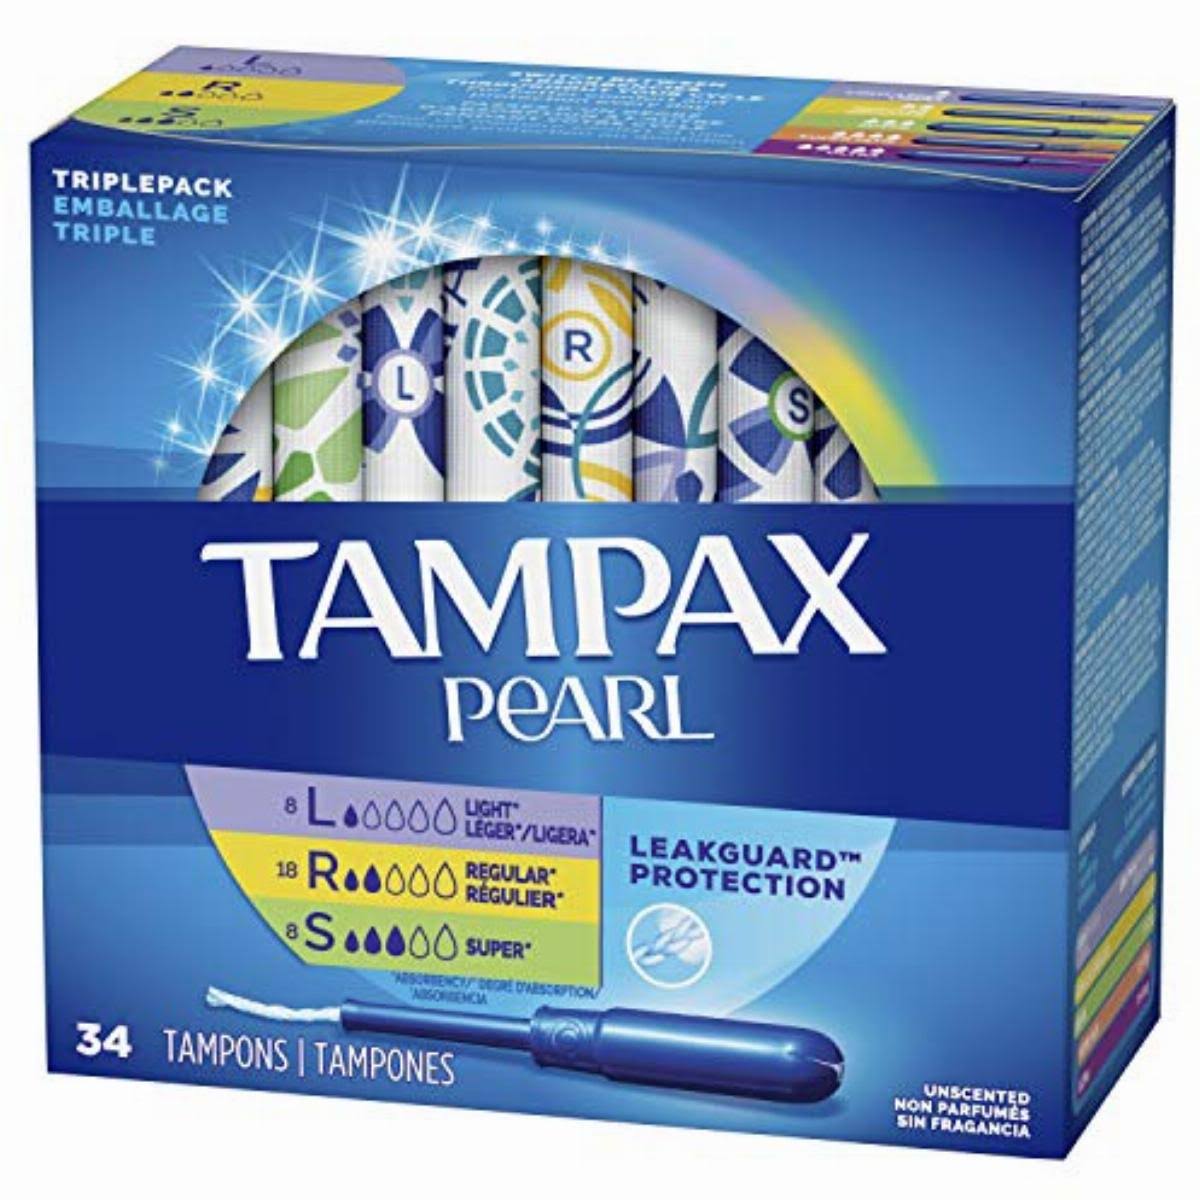 Tampax Pearl Plastic Tampons - Triple Pack with Light, Regular and Super Absorbency, Unscented, 34ct